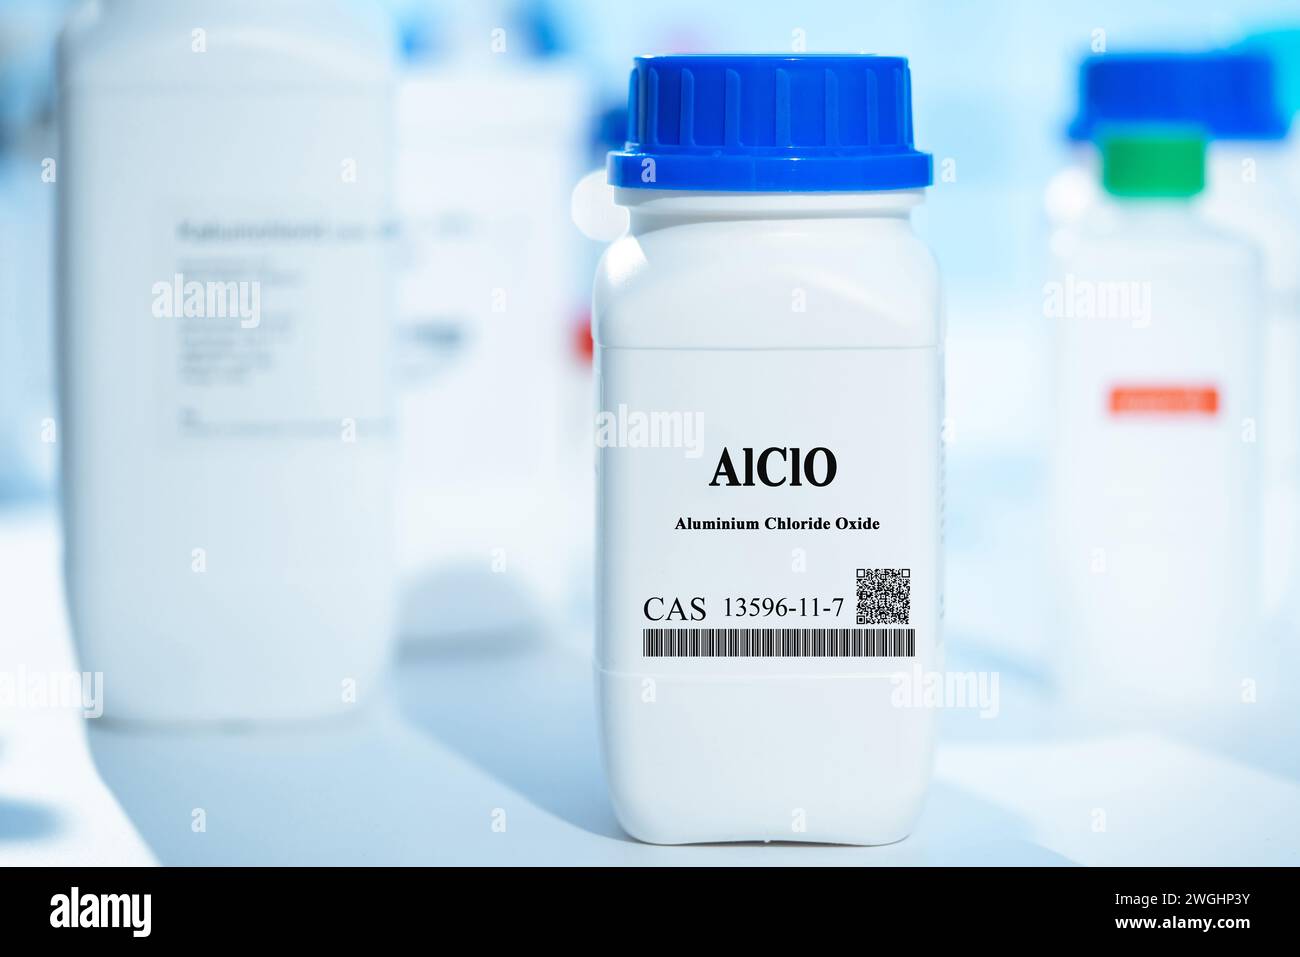 AlClO aluminium chloride oxide CAS 13596-11-7 chemical substance in white plastic laboratory packaging Stock Photo